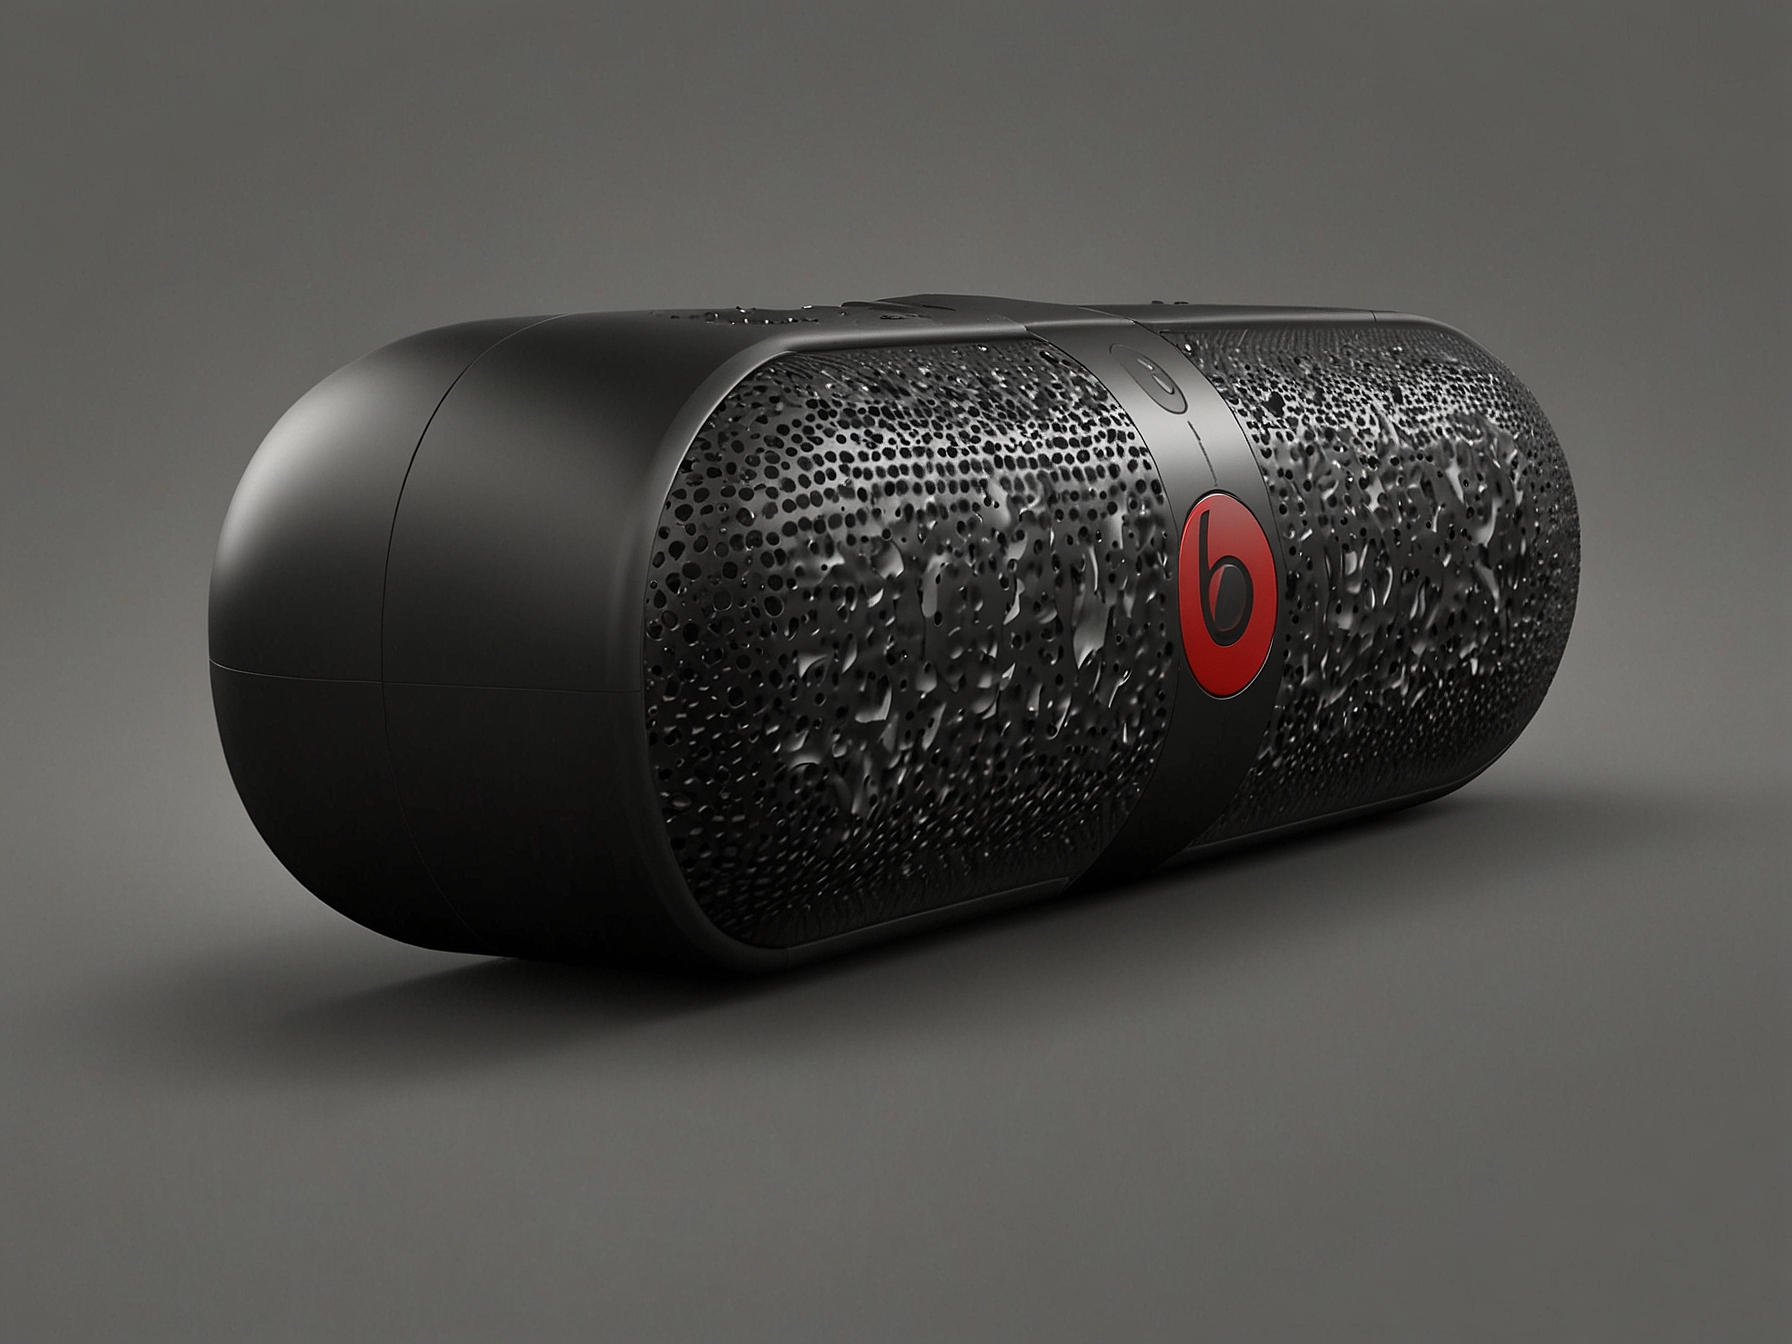 Speculated design of the new Beats Pill shows a sleek, compact, and durable speaker with potential waterproofing and dust resistance, suitable for both indoor and outdoor use.